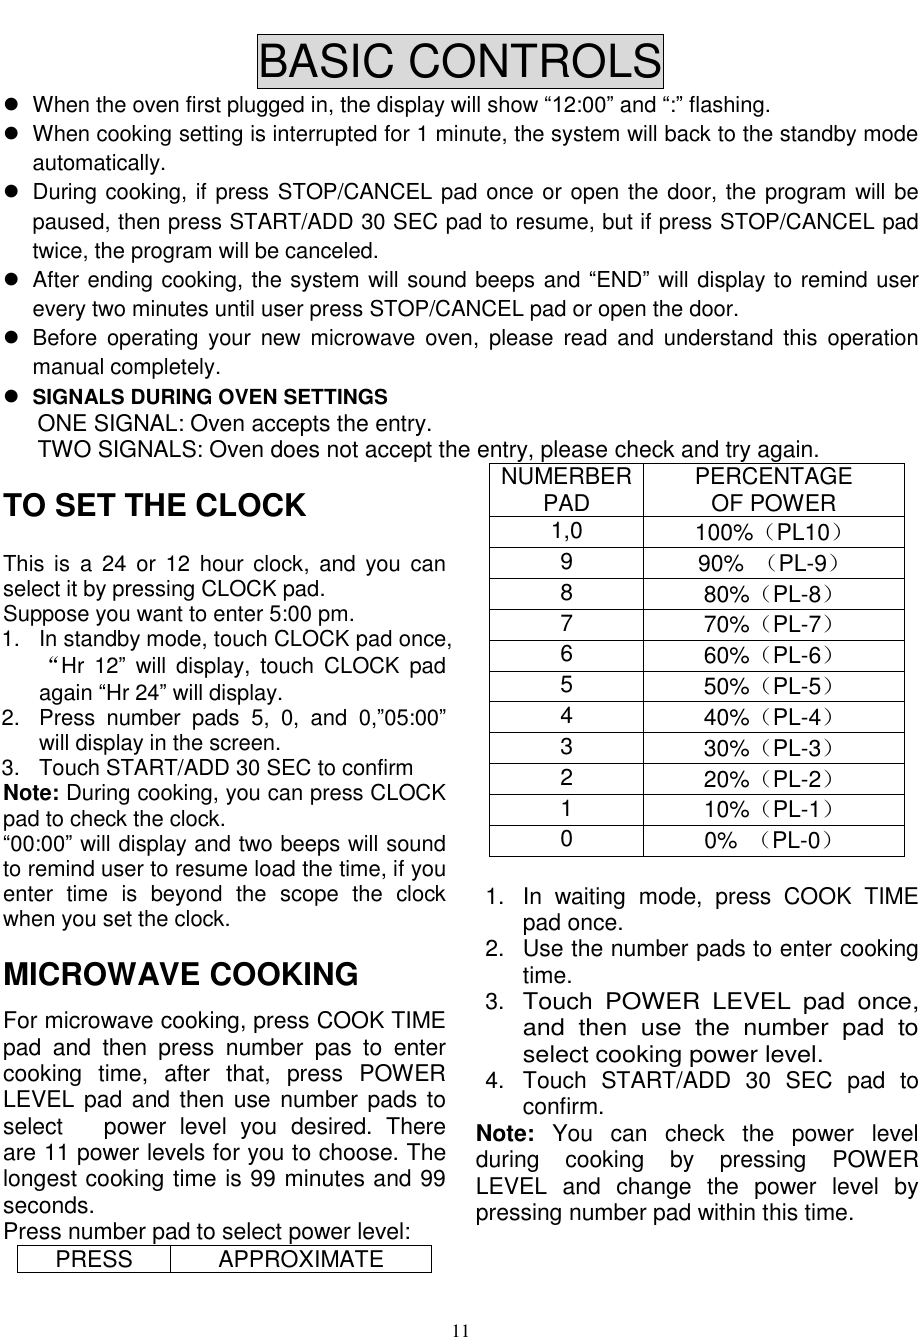  11  BASIC CONTROLS   When the oven first plugged in, the display will show “12:00” and “:” flashing.   When cooking setting is interrupted for 1 minute, the system will back to the standby mode automatically.     During cooking, if press STOP/CANCEL pad once or open the door, the program will be paused, then press START/ADD 30 SEC pad to resume, but if press STOP/CANCEL pad twice, the program will be canceled.   After ending cooking, the system will sound beeps and “END” will display to remind user every two minutes until user press STOP/CANCEL pad or open the door.   Before  operating  your  new microwave  oven,  please  read  and  understand  this  operation manual completely.  SIGNALS DURING OVEN SETTINGS ONE SIGNAL: Oven accepts the entry. TWO SIGNALS: Oven does not accept the entry, please check and try again. TO SET THE CLOCK This  is  a  24  or  12  hour  clock,  and  you can select it by pressing CLOCK pad.   Suppose you want to enter 5:00 pm. 1.  In standby mode, touch CLOCK pad once,“Hr  12”  will  display,  touch  CLOCK  pad again “Hr 24” will display. 2.  Press  number  pads  5,  0,  and  0,”05:00” will display in the screen. 3.  Touch START/ADD 30 SEC to confirm Note: During cooking, you can press CLOCK pad to check the clock. “00:00” will display and two beeps will sound to remind user to resume load the time, if you enter  time  is  beyond  the  scope  the  clock when you set the clock. MICROWAVE COOKING For microwave cooking, press COOK TIME pad  and  then  press  number  pas  to  enter cooking  time,  after  that,  press  POWER LEVEL pad and then use number pads to select      power  level  you  desired.  There are 11 power levels for you to choose. The longest cooking time is 99 minutes and 99 seconds. Press number pad to select power level: PRESS APPROXIMATE NUMERBER PAD PERCENTAGE OF POWER 1,0 100%（PL10） 9 90%  （PL-9） 8 80%（PL-8） 7 70%（PL-7） 6 60%（PL-6） 5 50%（PL-5） 4 40%（PL-4） 3 30%（PL-3） 2 20%（PL-2） 1 10%（PL-1） 0 0%  （PL-0）  1.  In  waiting  mode,  press  COOK  TIME pad once. 2.  Use the number pads to enter cooking time. 3. Touch  POWER  LEVEL  pad  once, and  then  use  the  number  pad  to select cooking power level.  4.  Touch  START/ADD  30  SEC  pad  to confirm. Note:  You  can  check  the  power  level during  cooking  by  pressing  POWER LEVEL  and  change  the  power  level  by pressing number pad within this time. 